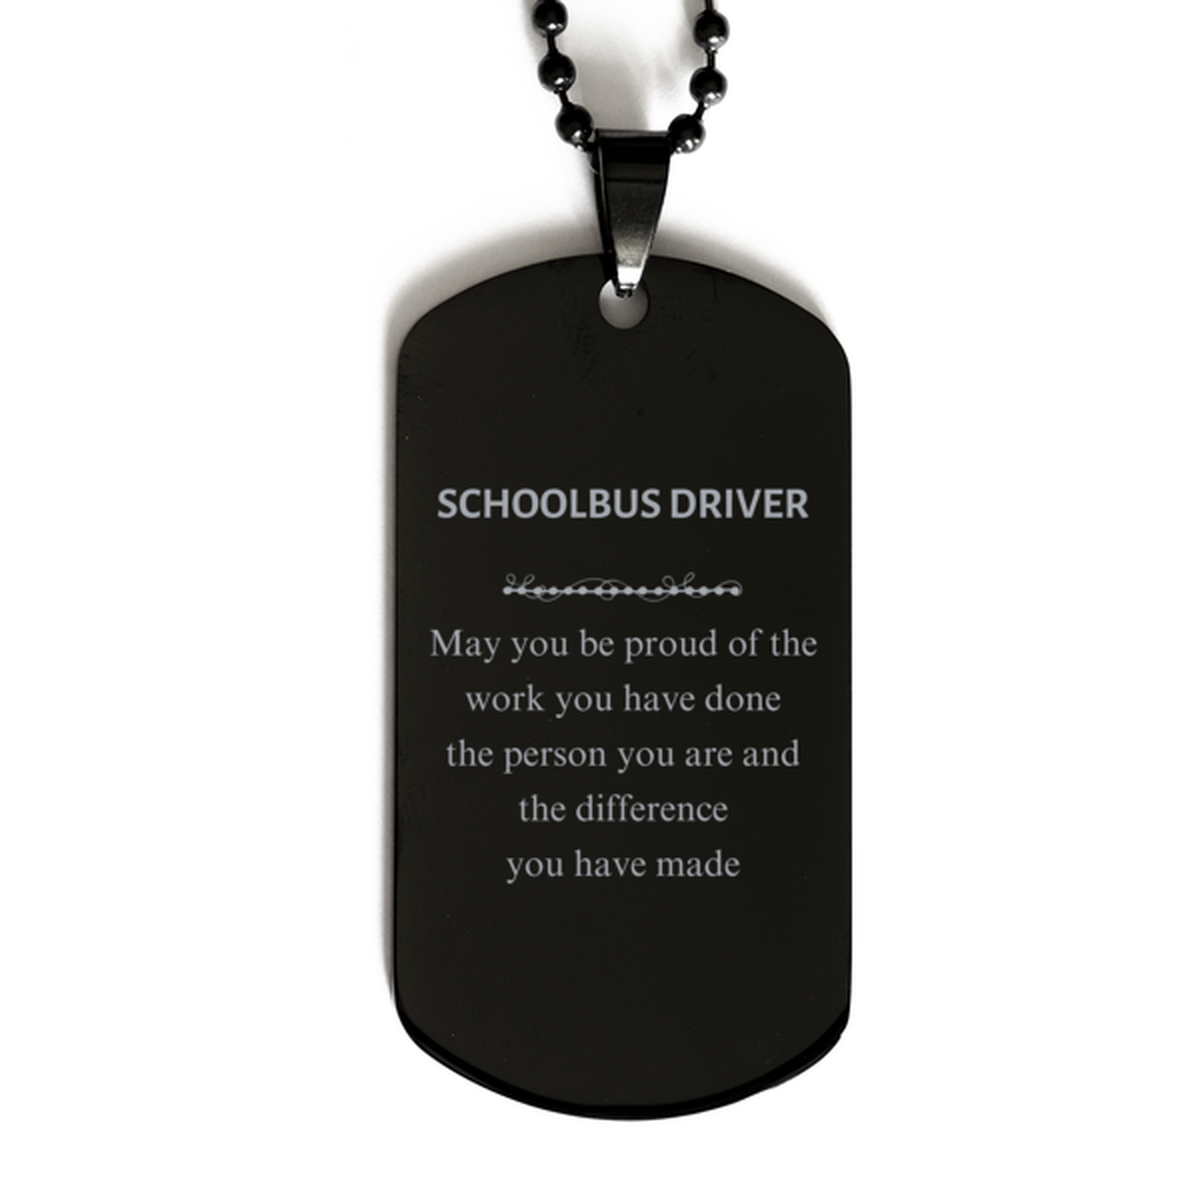 Schoolbus Driver May you be proud of the work you have done, Retirement Schoolbus Driver Black Dog Tag for Colleague Appreciation Gifts Amazing for Schoolbus Driver